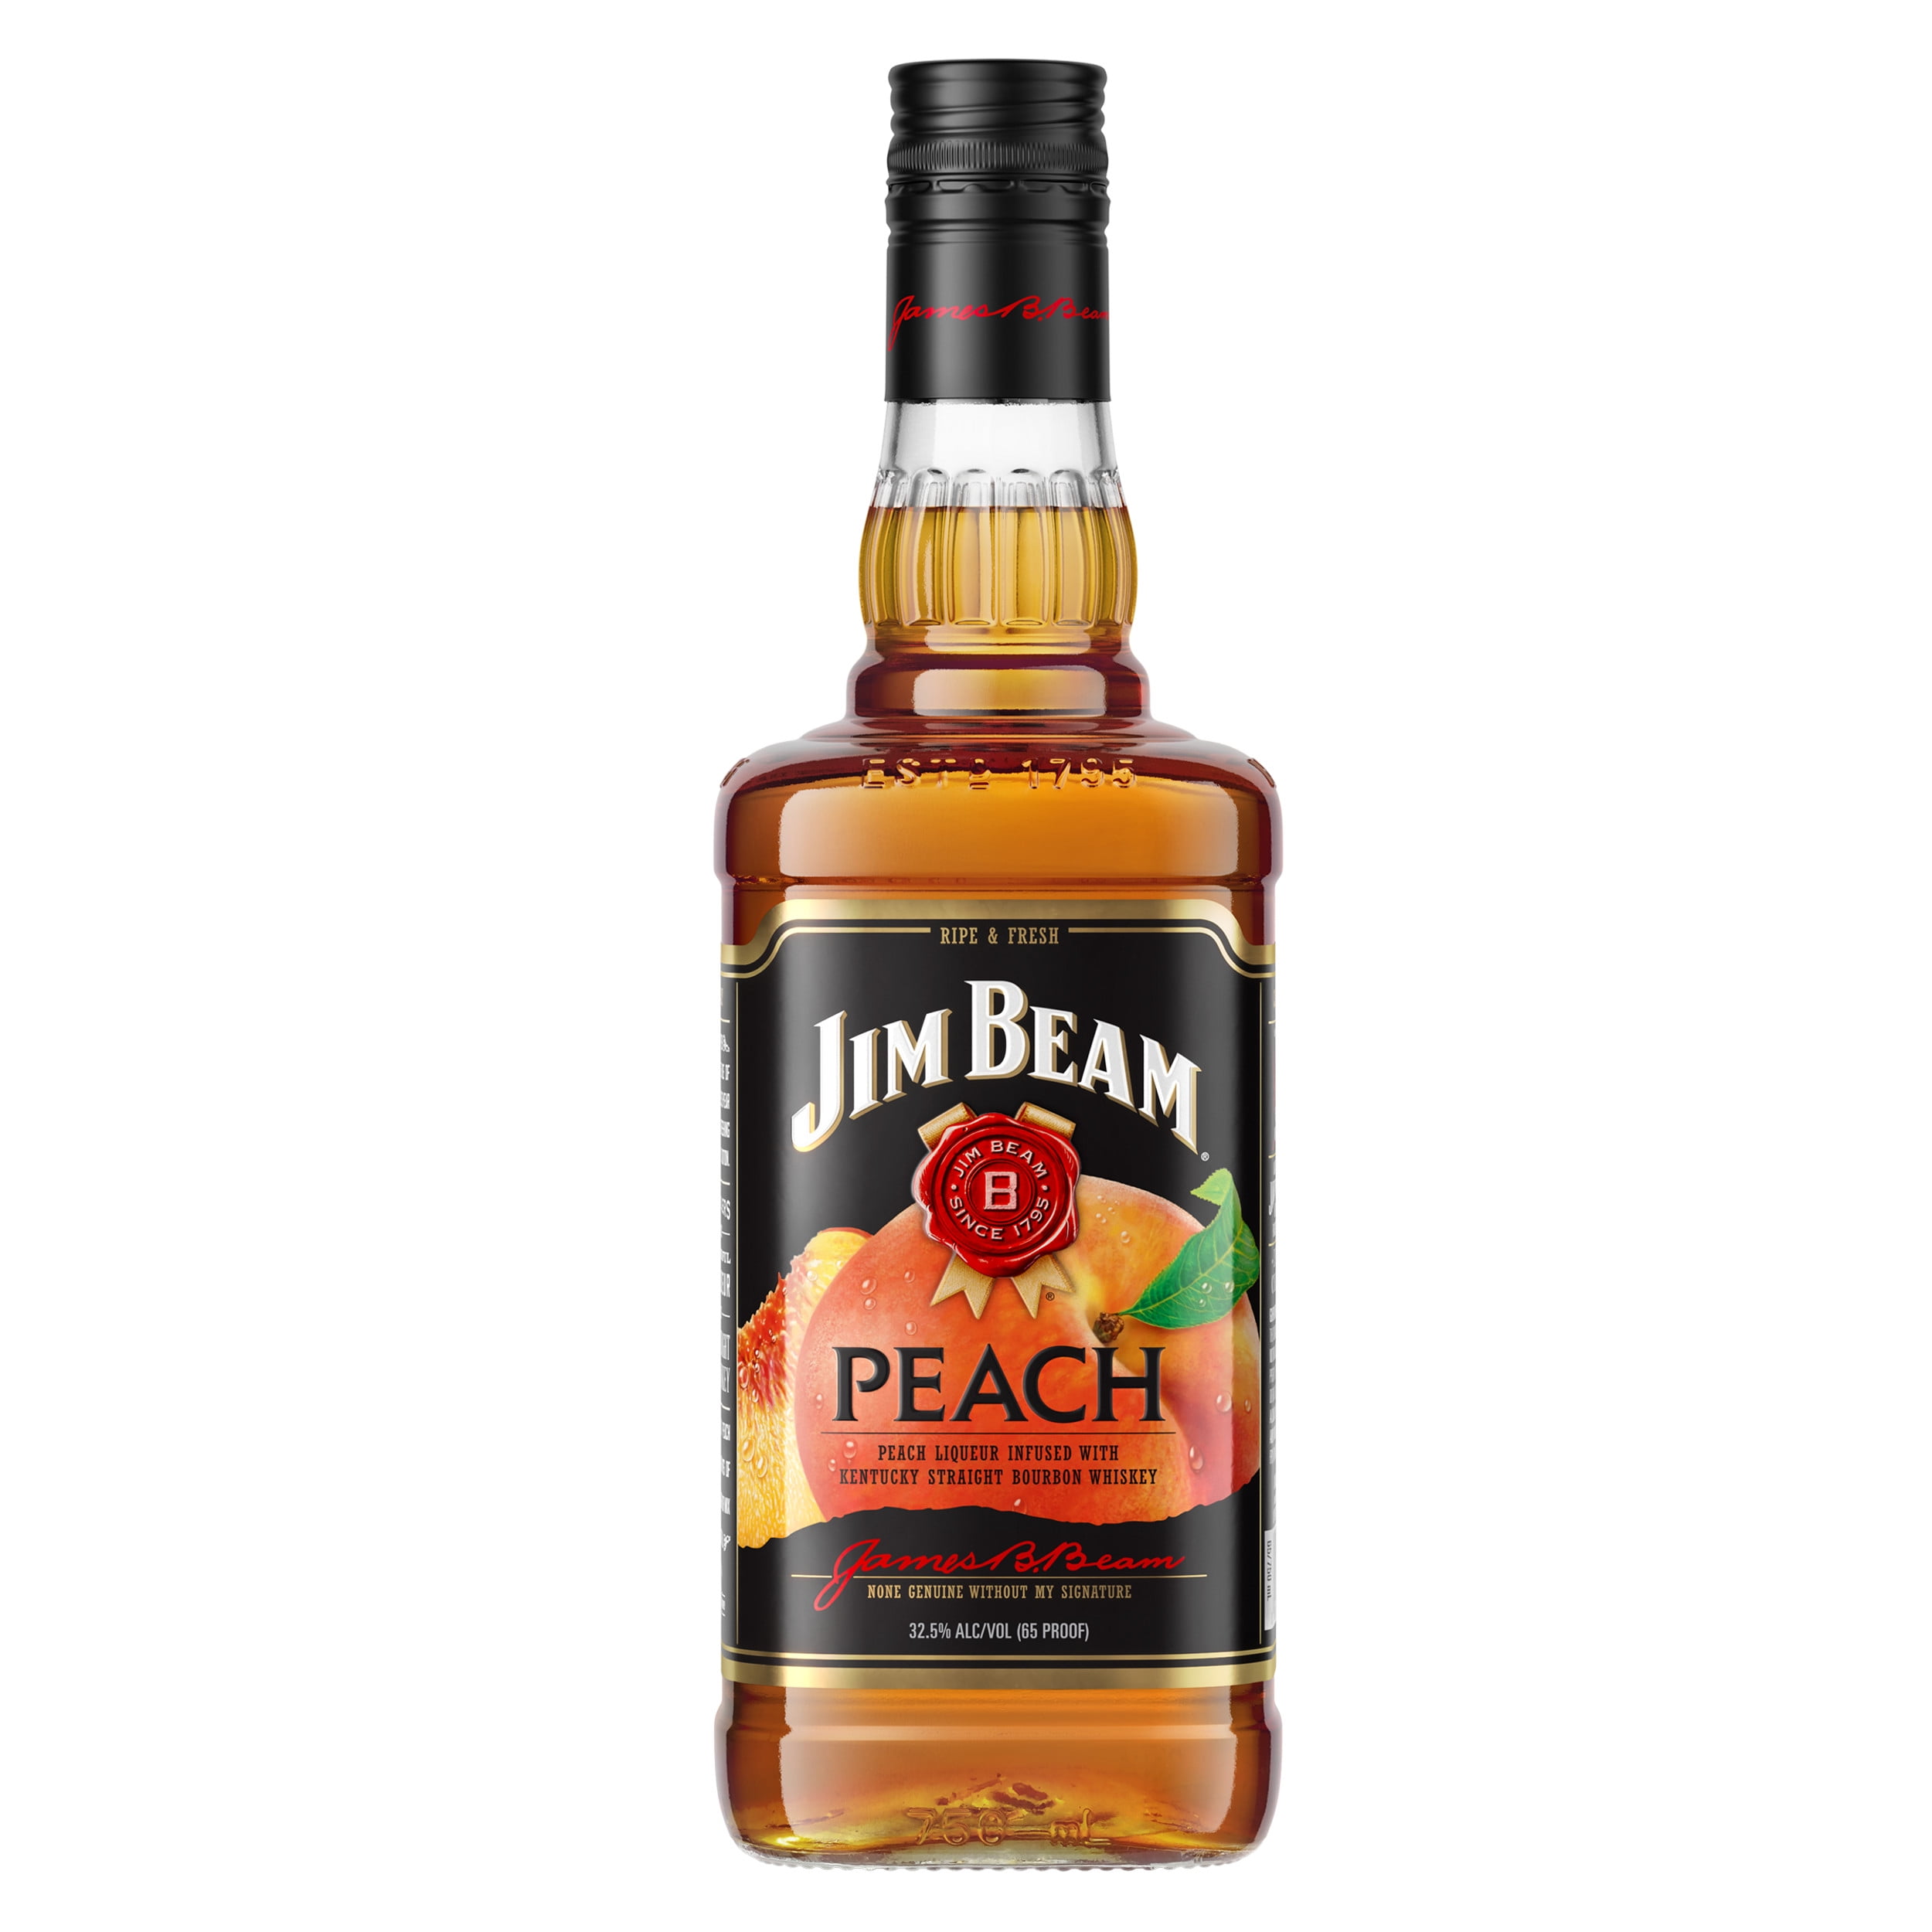 Jim Beam Bottle, ABV Peach ml Straight Bourbon 750 Flavored Whiskey, Infused 32.5